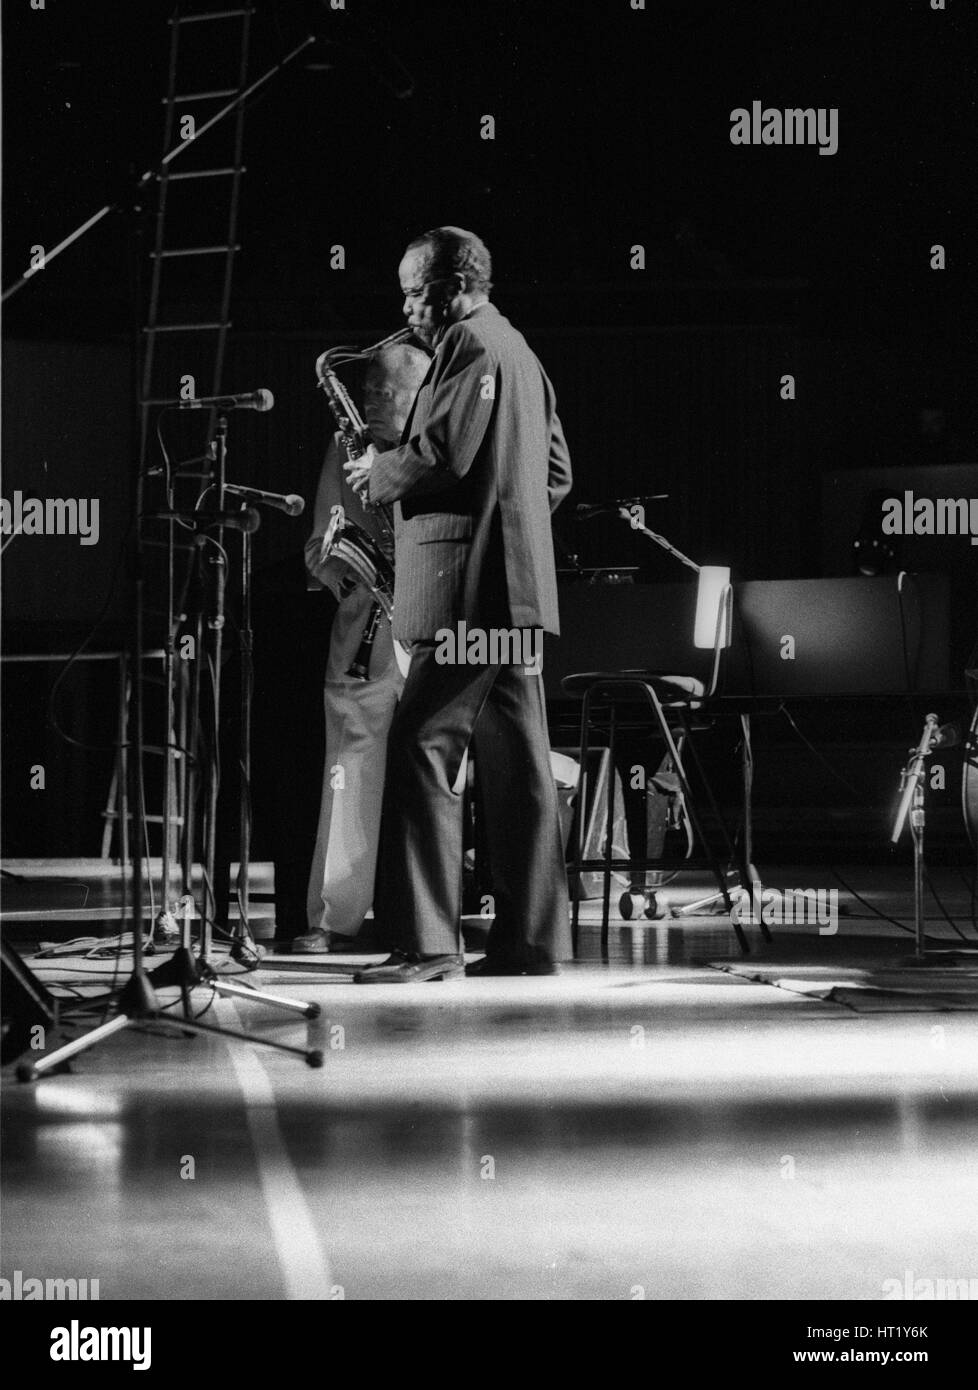 Buddy Tate and Woody Herman, Capital Jazz, Royal Festival Hall, London, July 1985.  Artist: Brian O'Connor. Stock Photo